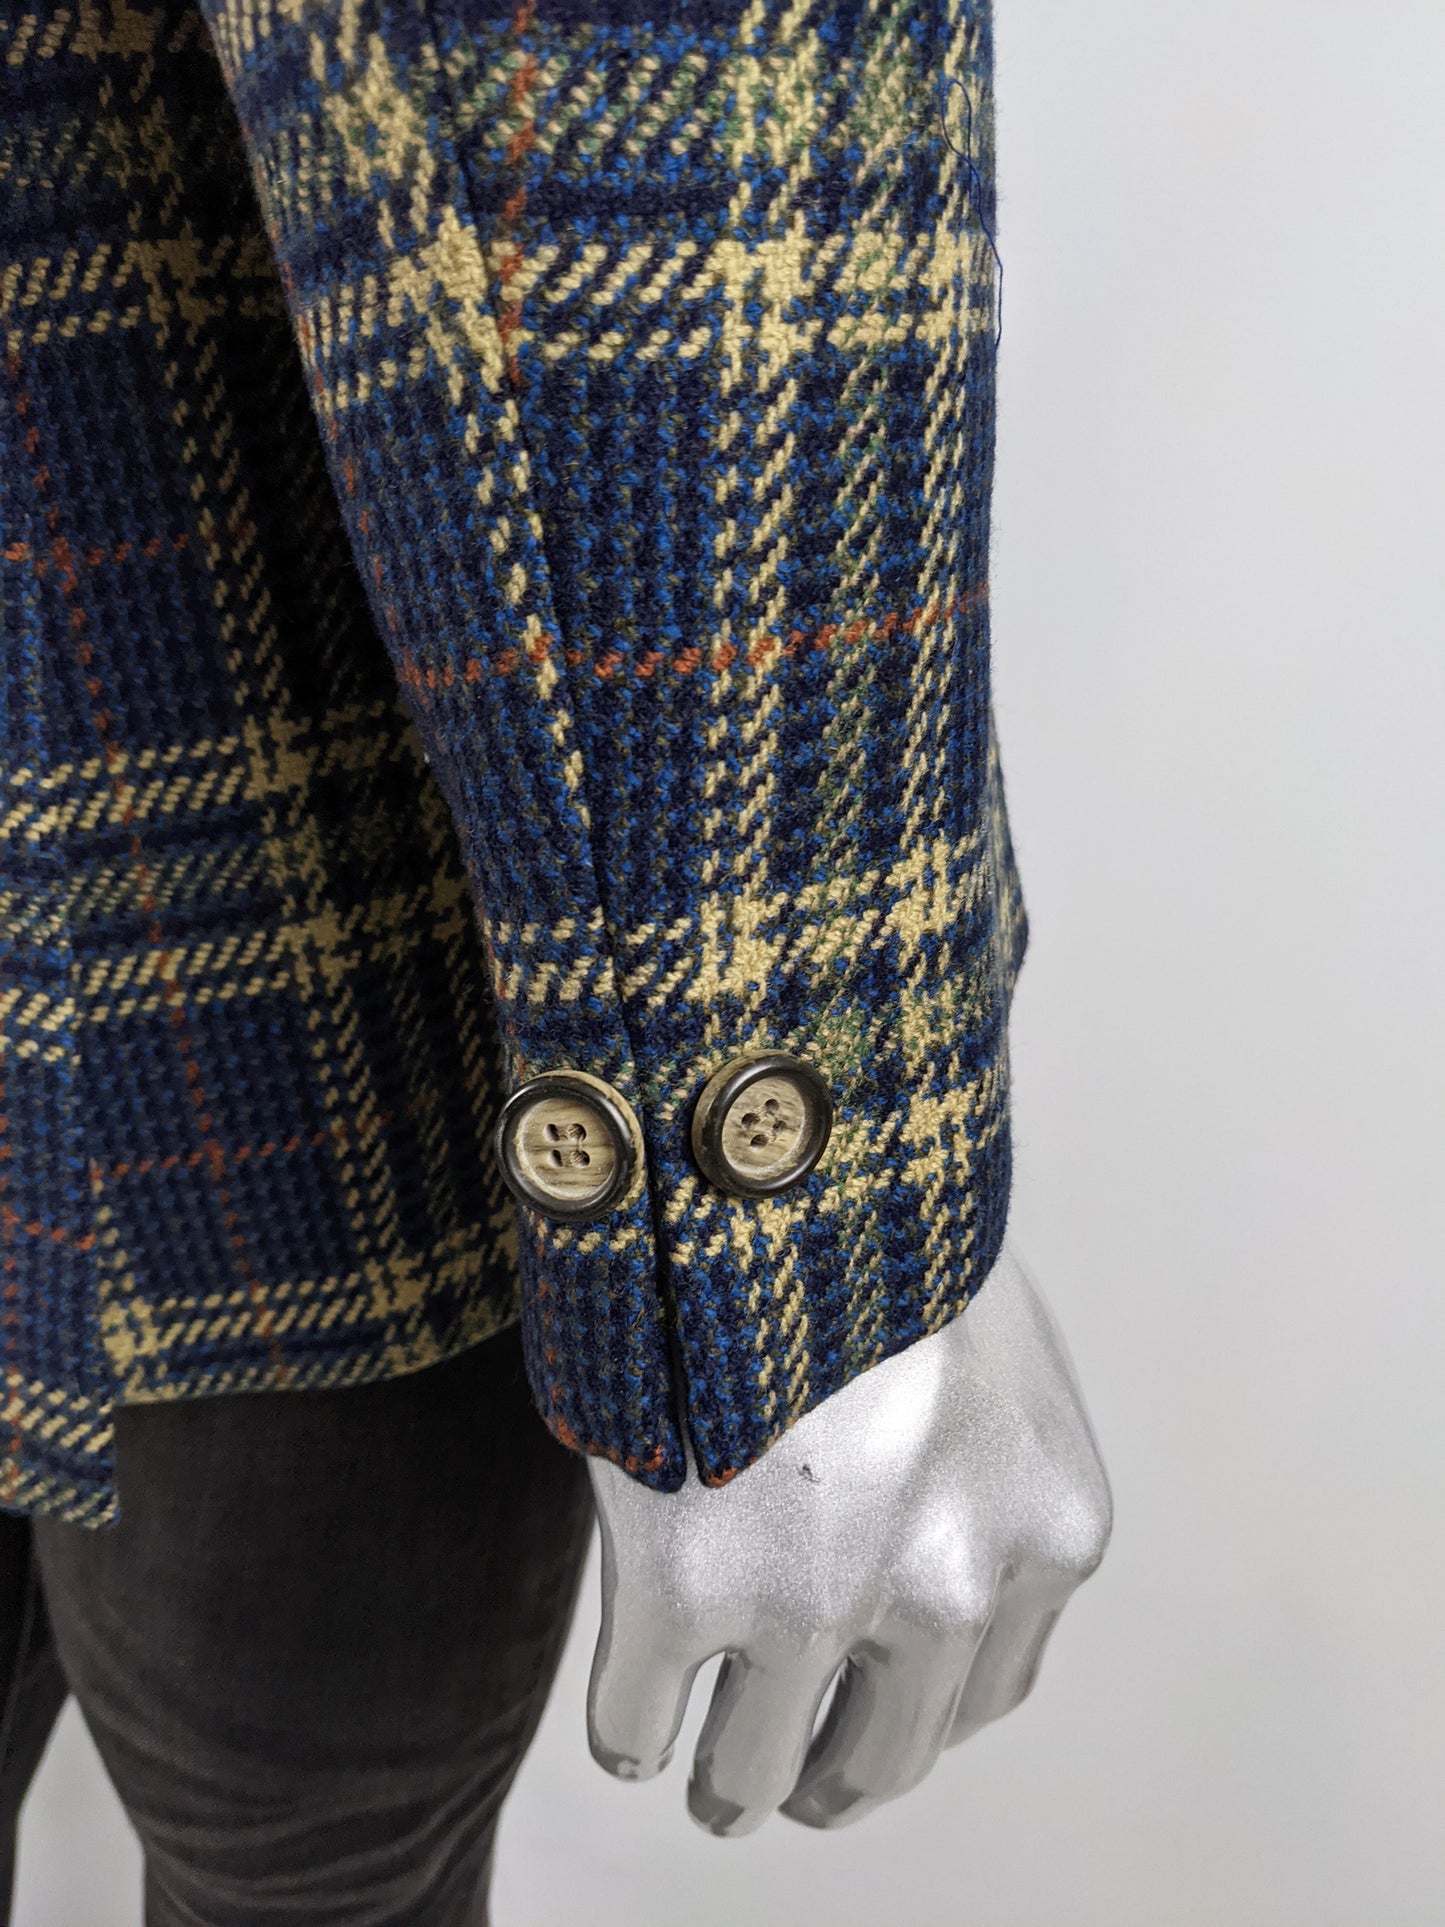 Simon of London Vintage Mens Blue Pure Wool Checked Jacket, 1970s